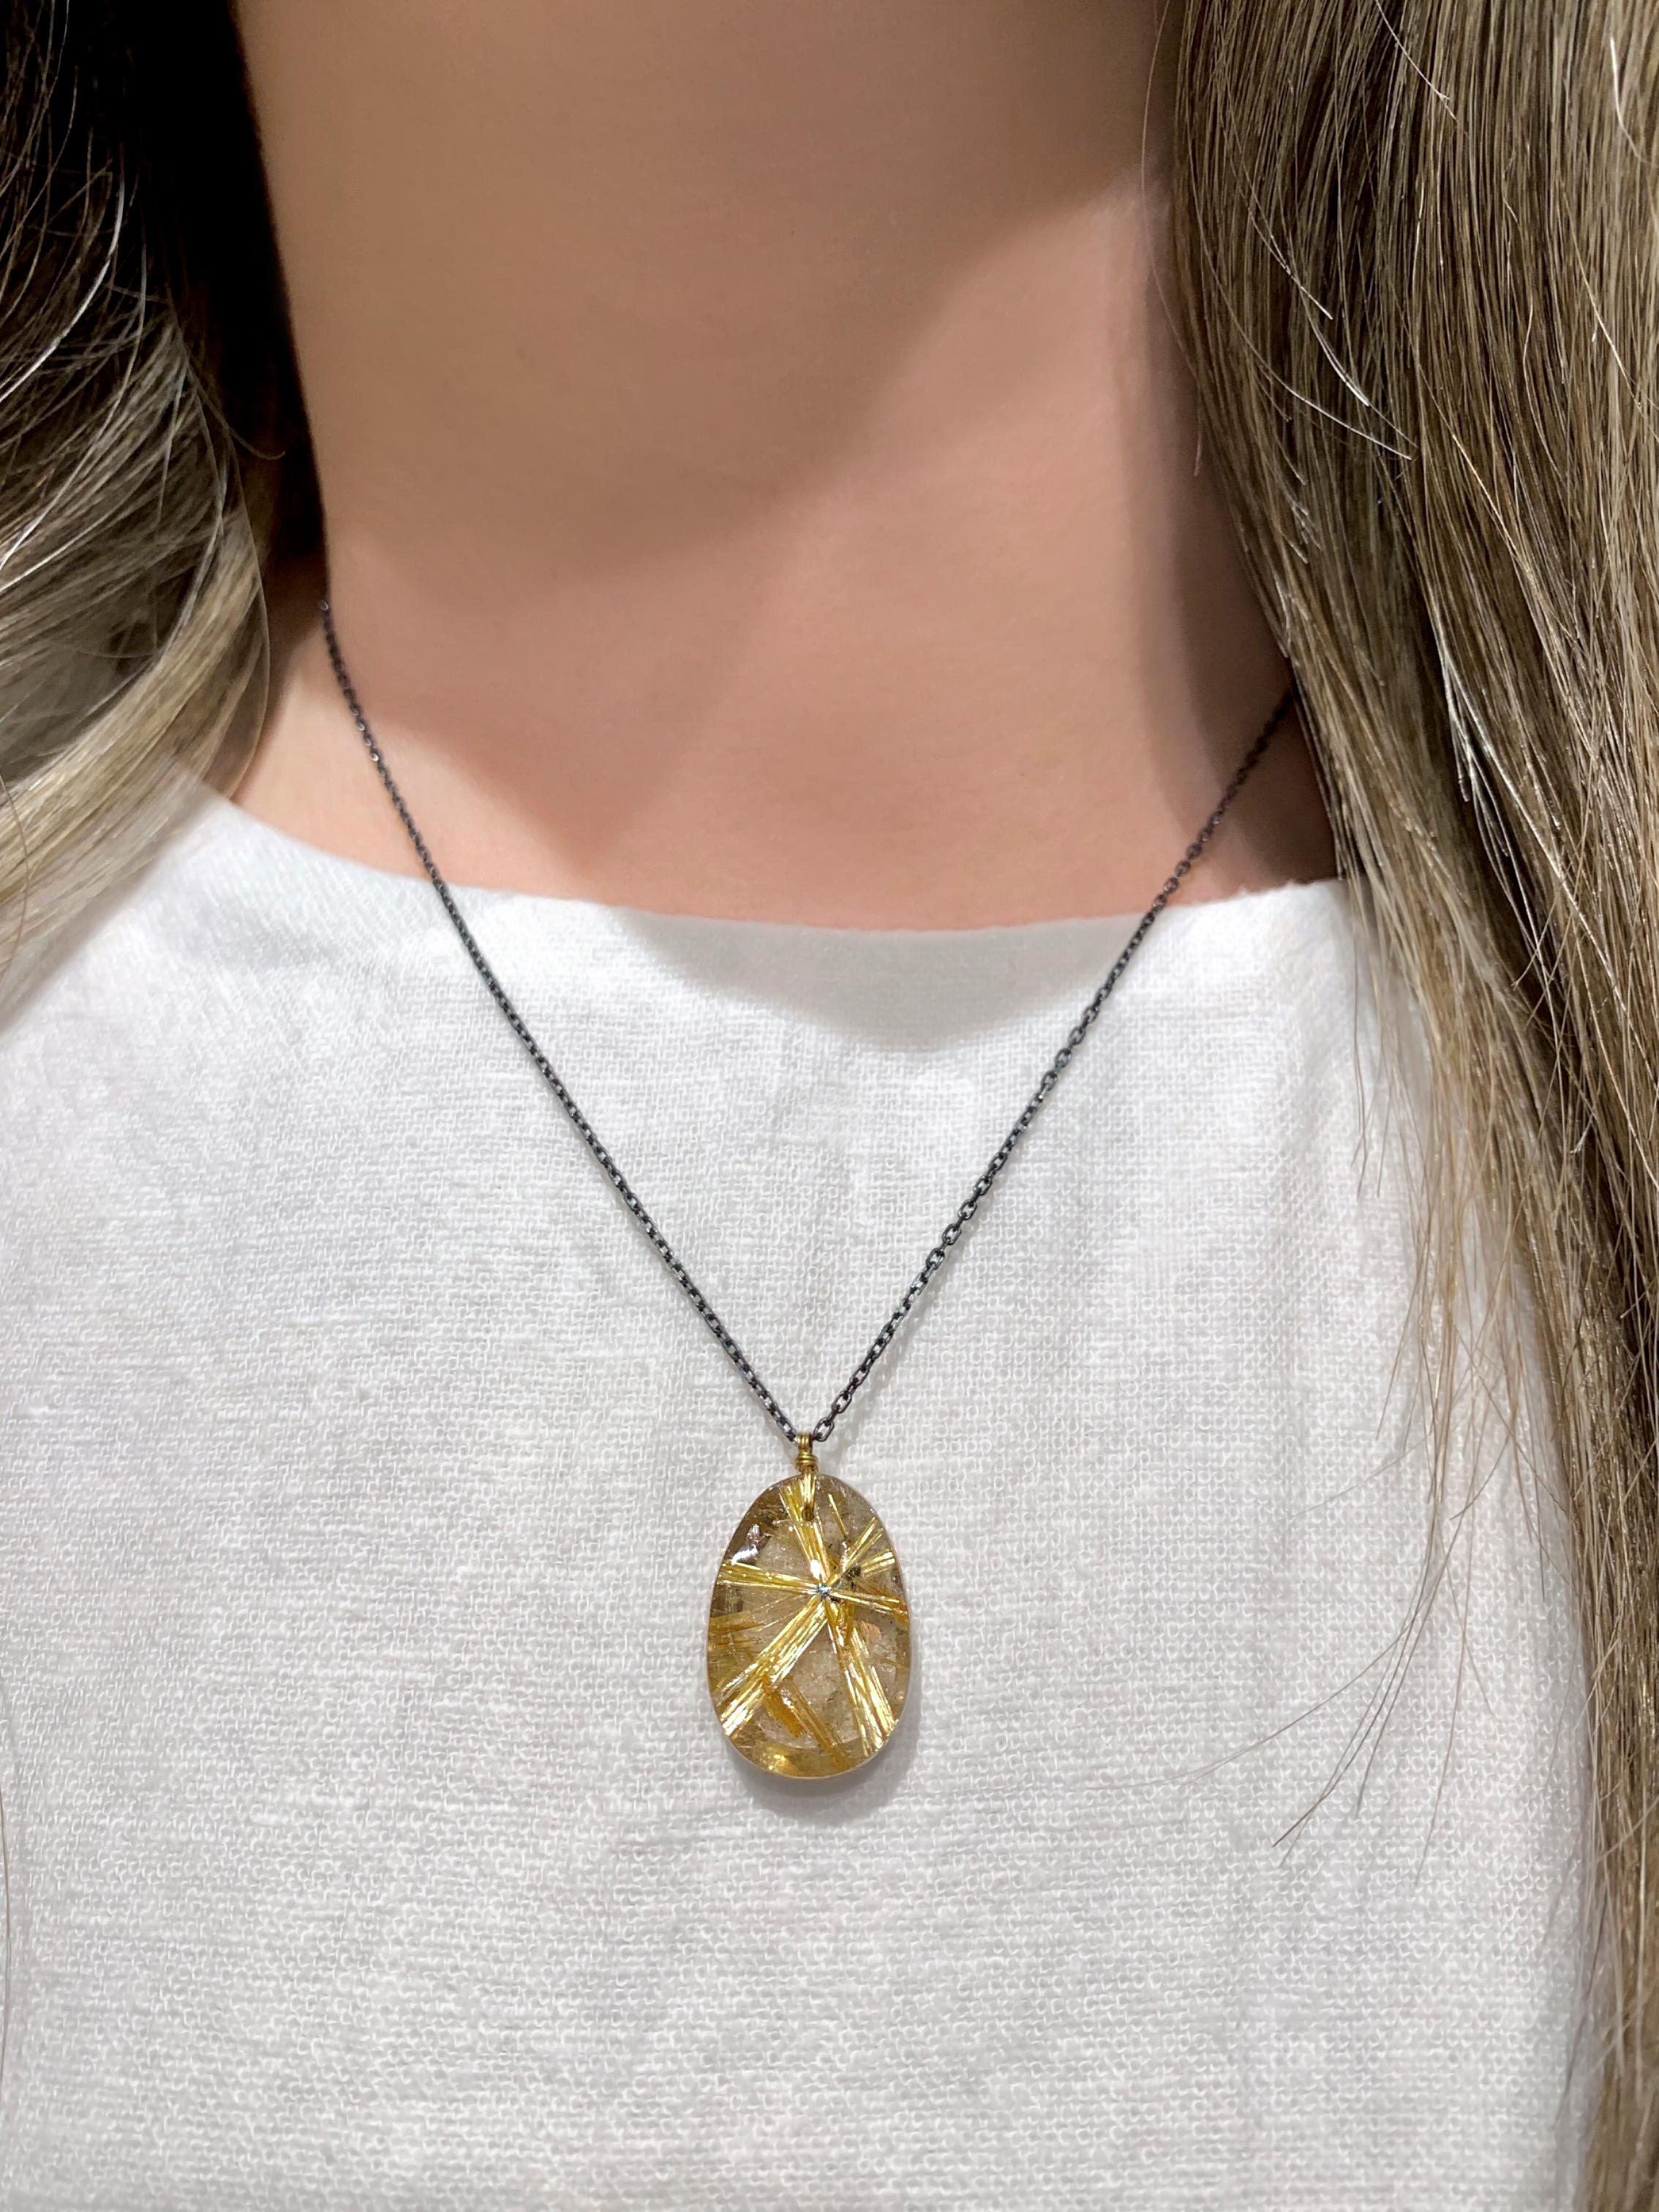 One of a Kind Necklace handmade by renowned jewelry designer Dana Kellin featuring a brilliant rutilated quartz pendant showcasing a prominent golden, six-sided rutile star, attached by way of the designer's signature hand-wrapped satin-finished 14k